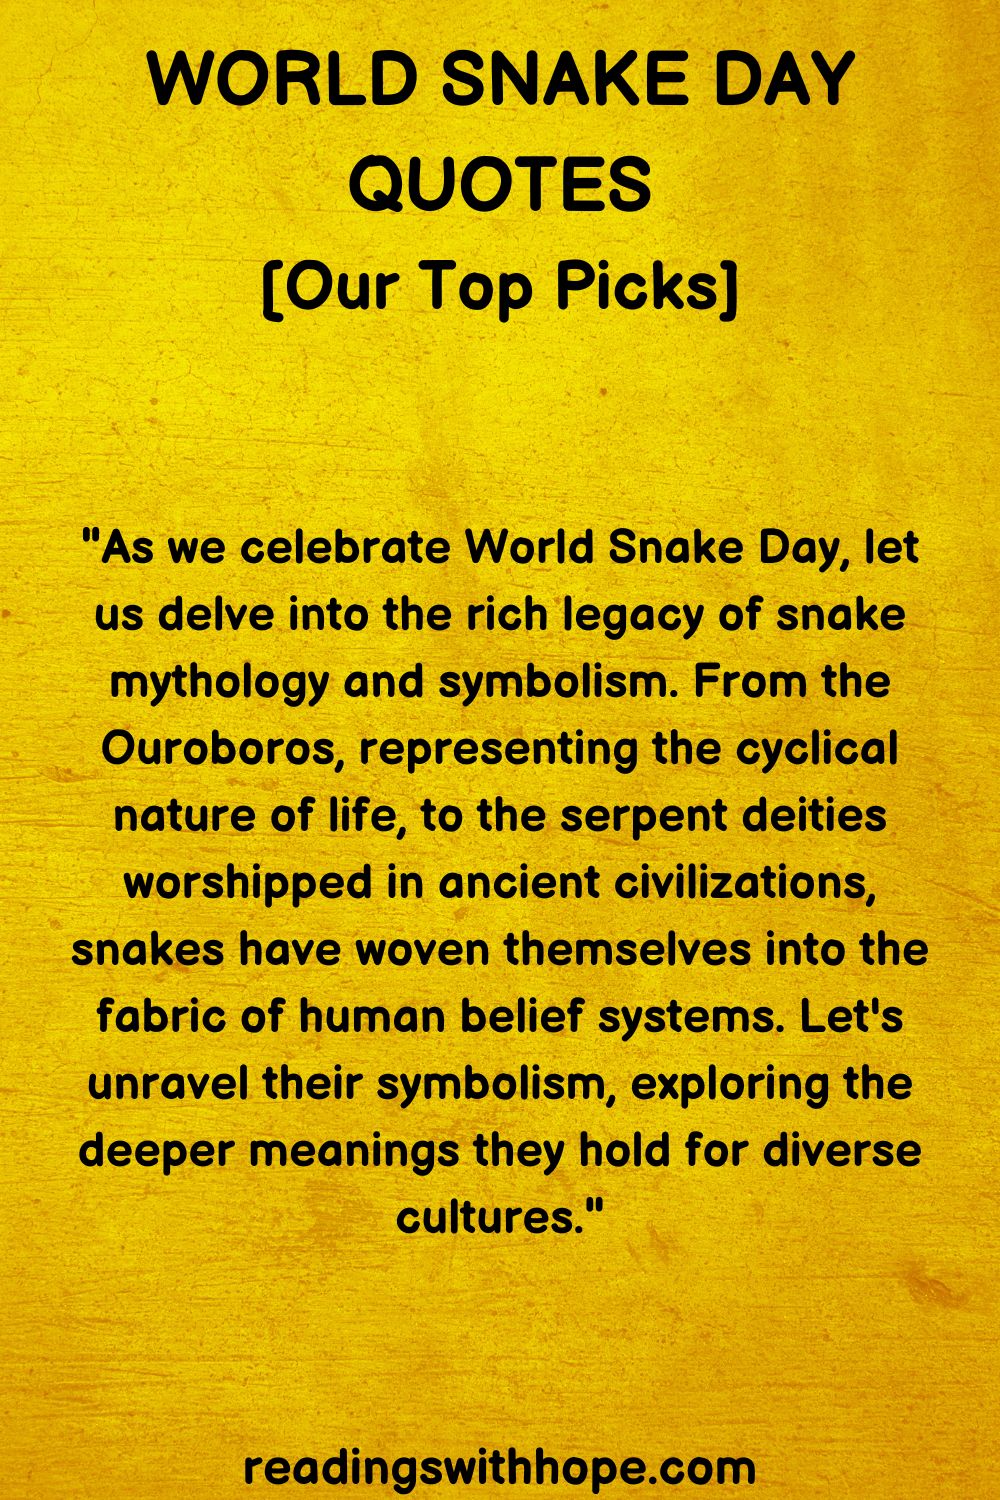 30 World Snake Day Quotes and Messages